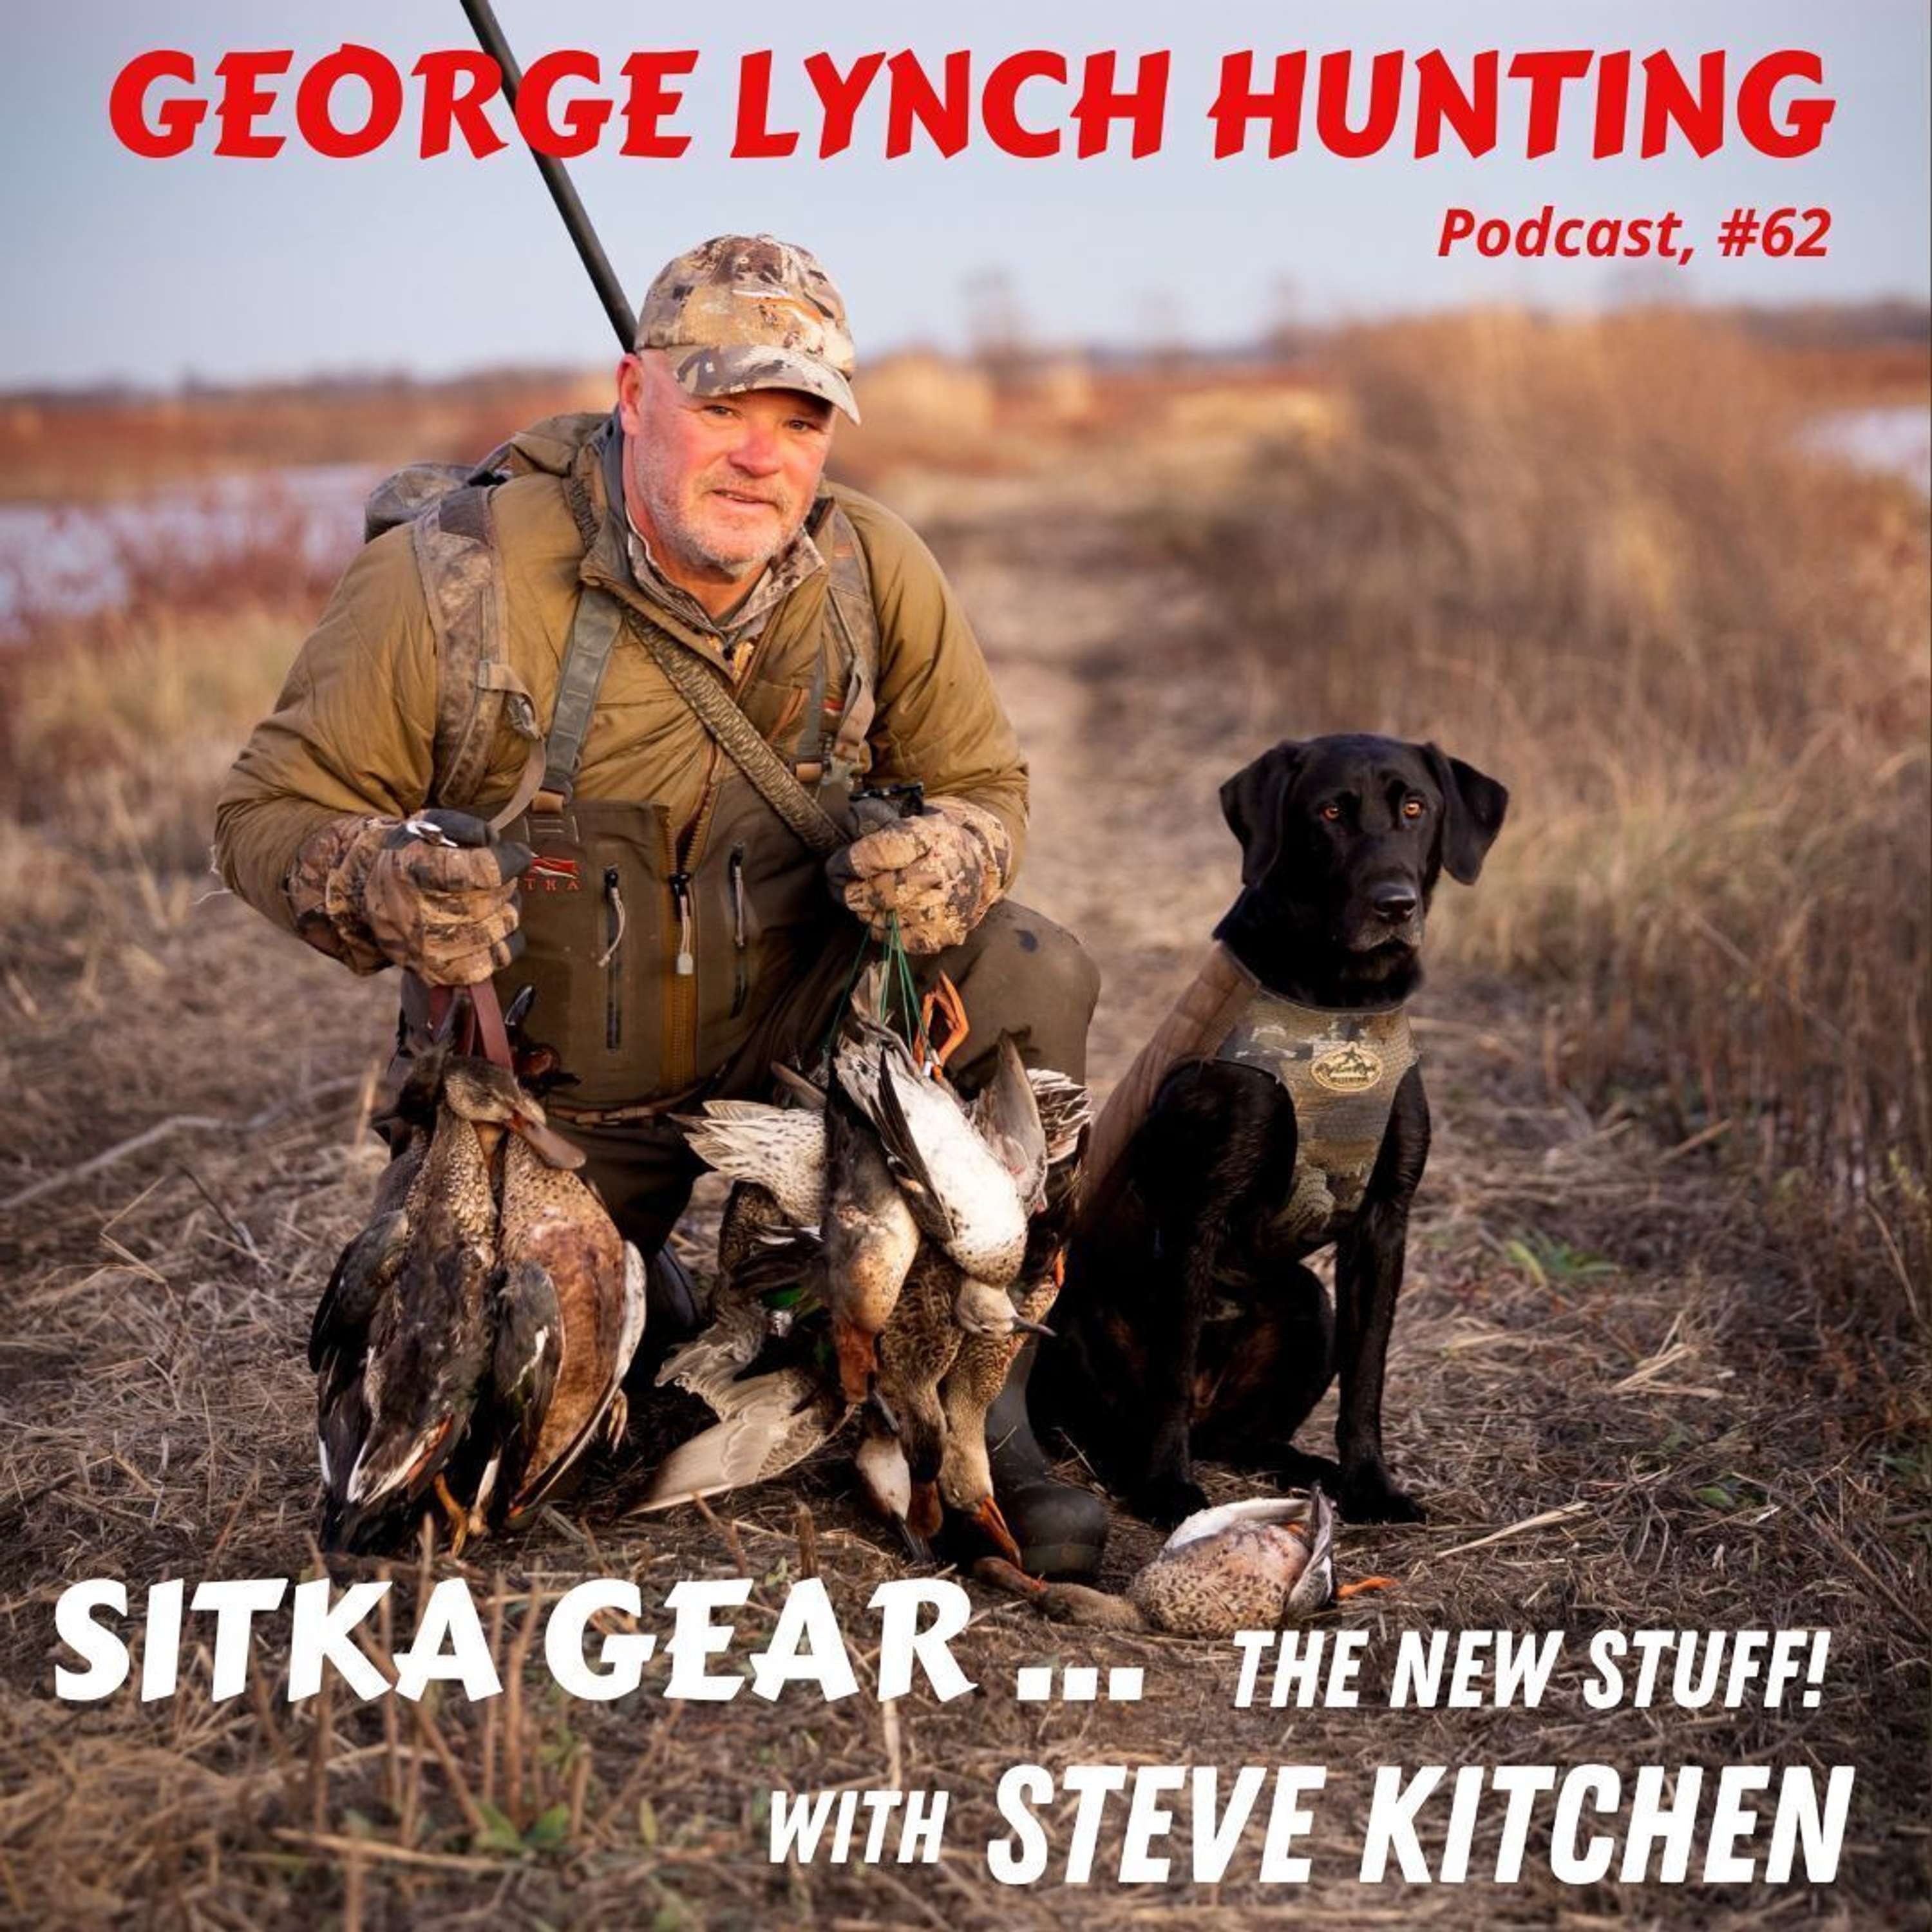 SITKA GEAR - THE NEW STUFF with STEVE KITCHEN